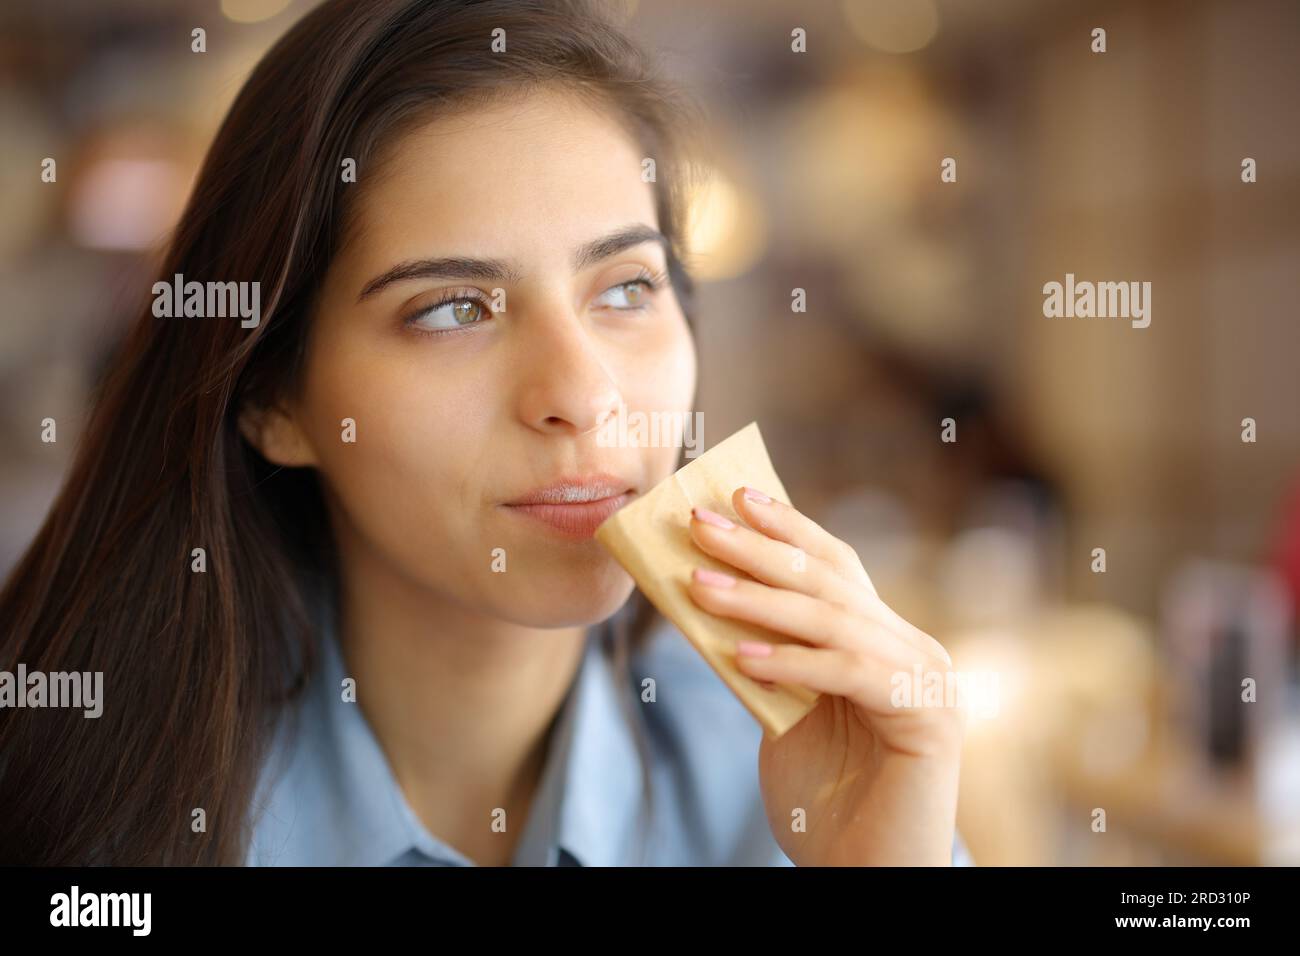 Restaurant customer cleaning mouth with paper tissue looking away Stock Photo